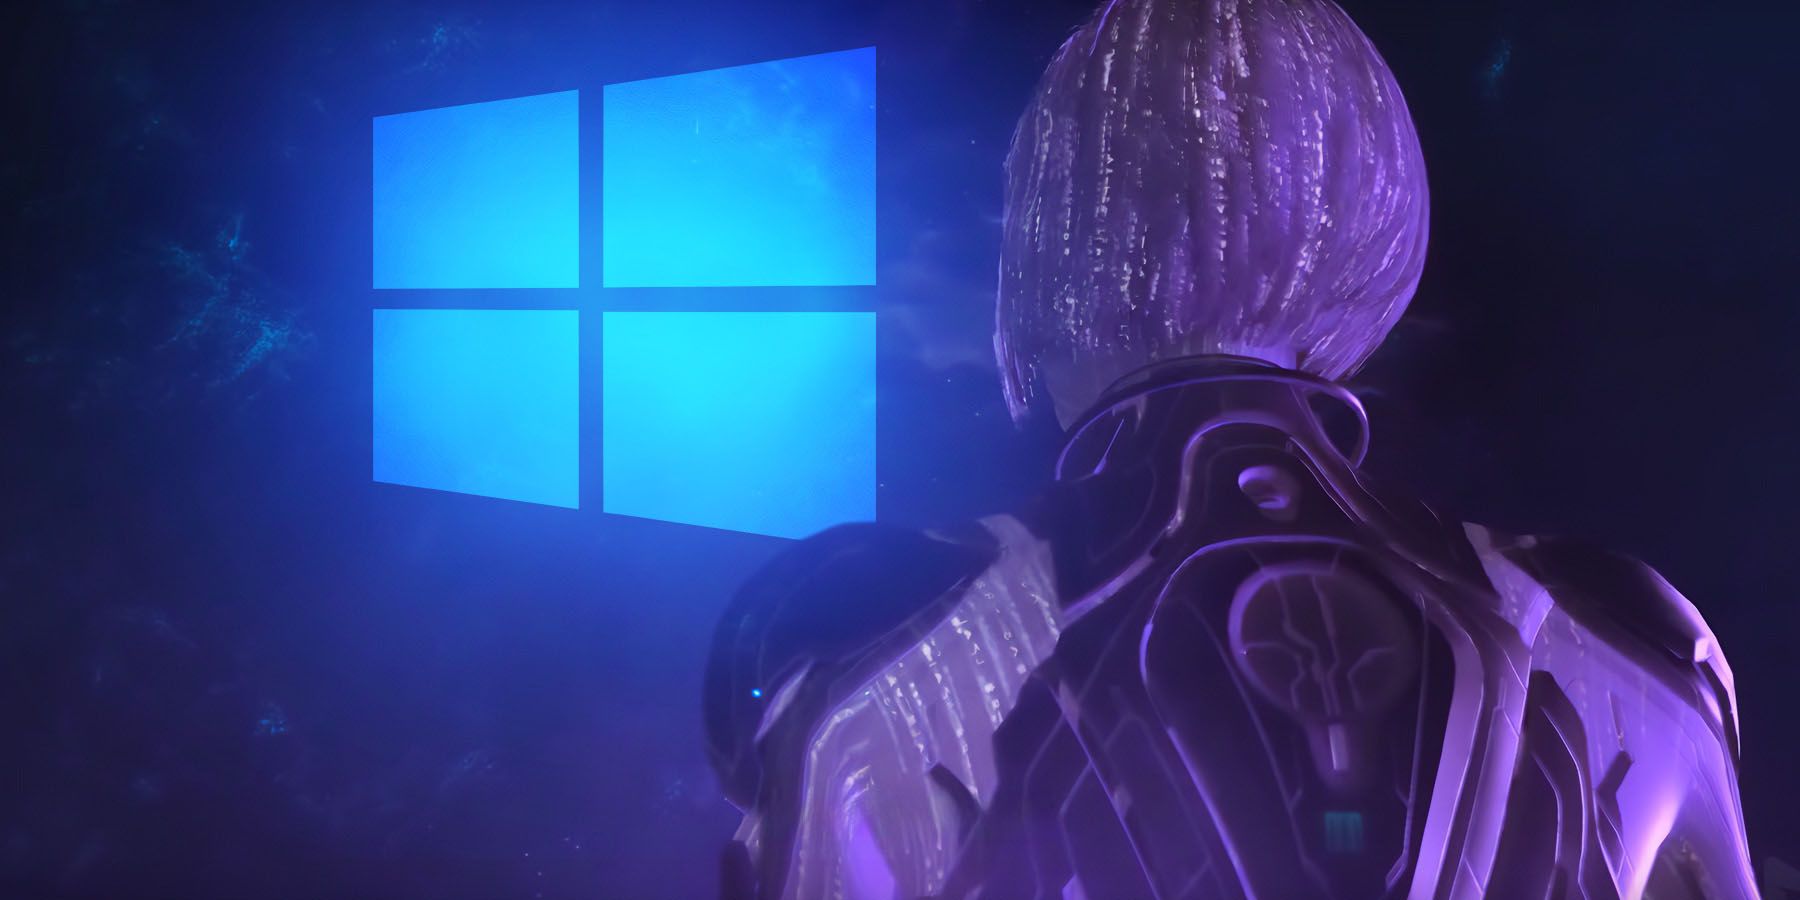 An image of Cortana's purple armored form from Halo Infinite looking at a blue hologram of the Windows logo.